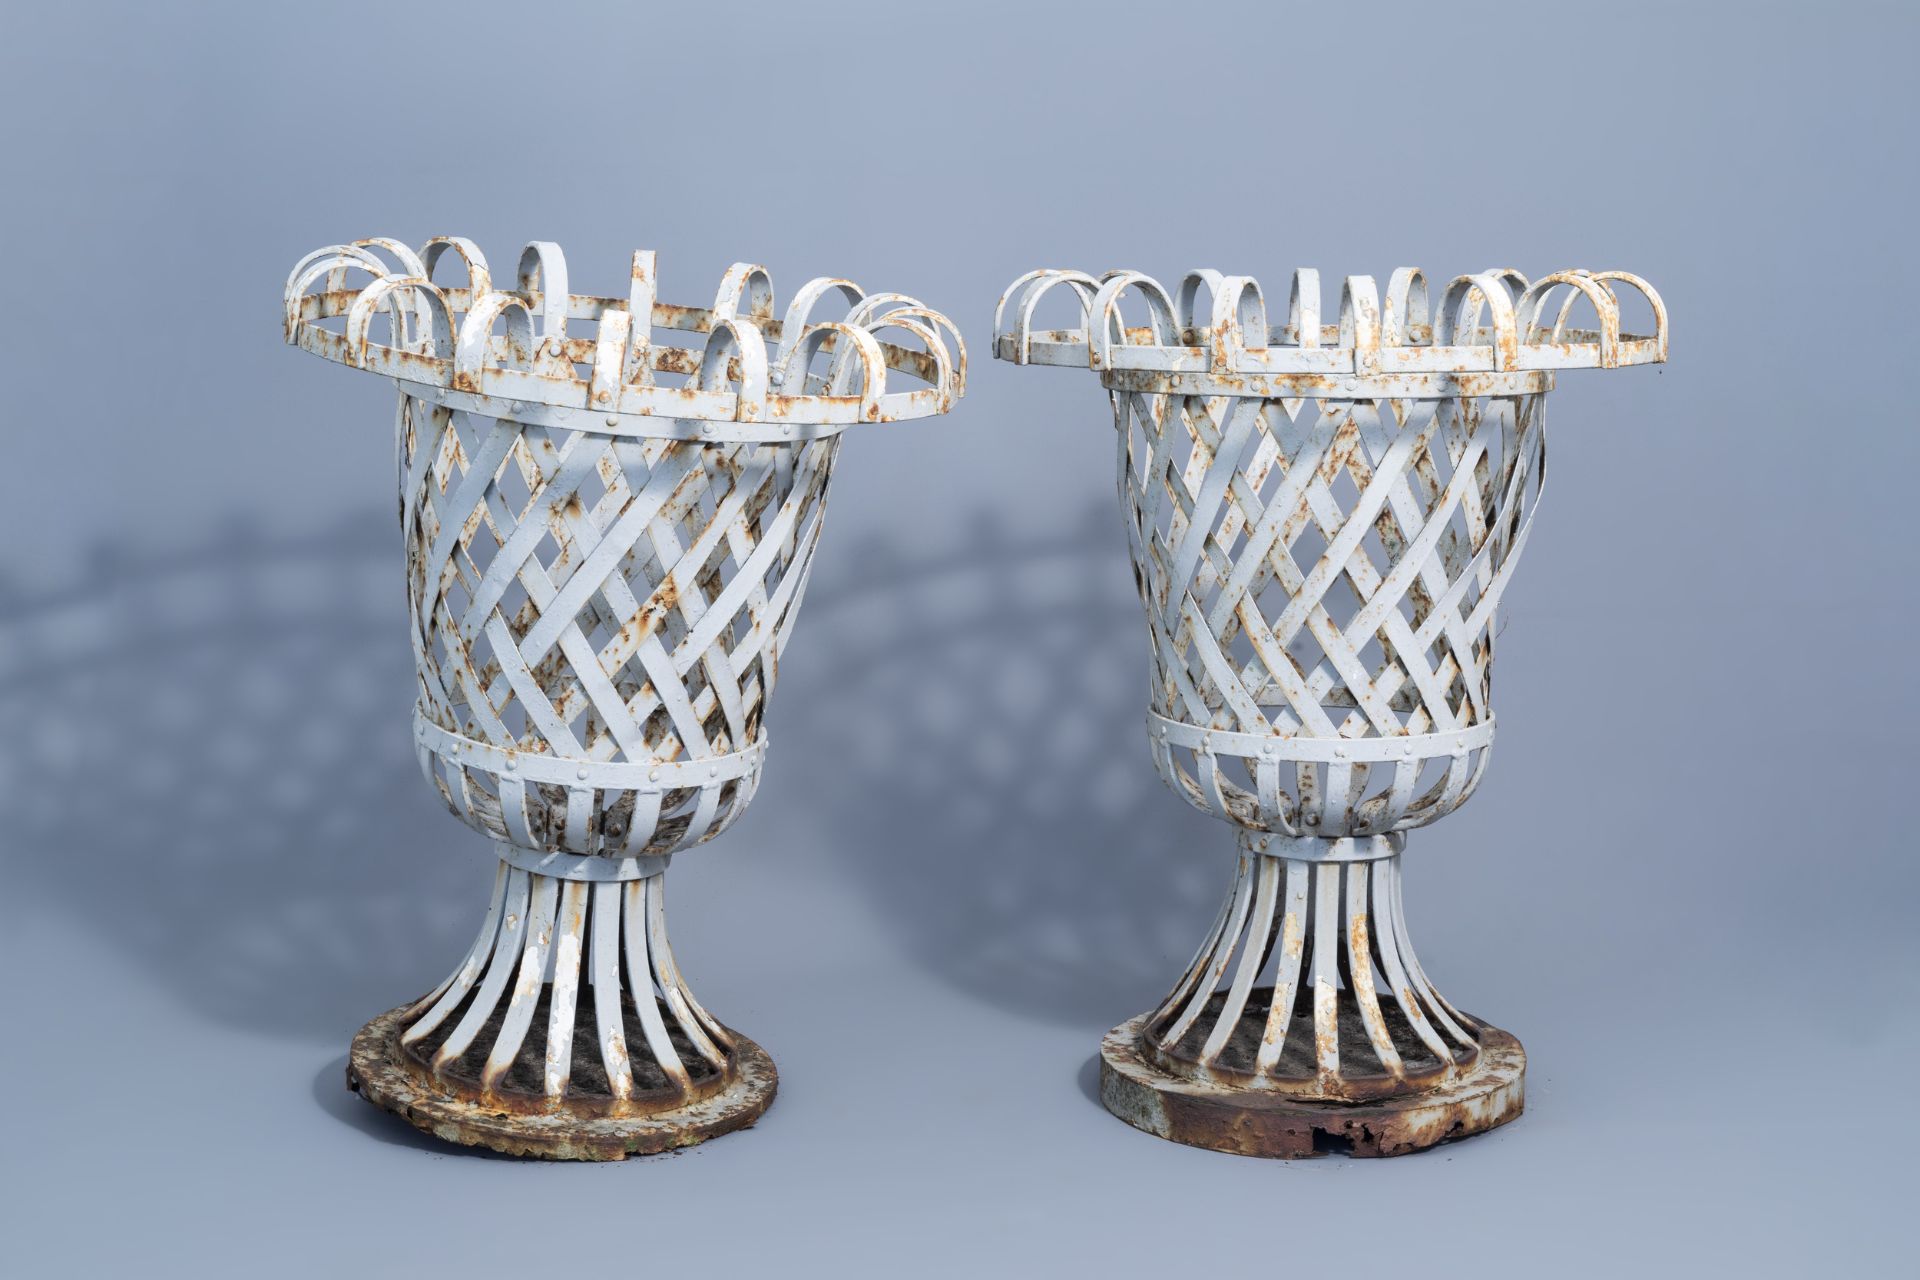 A pair of wrought iron reticulated garden urns, ca. 1900 - Image 4 of 6